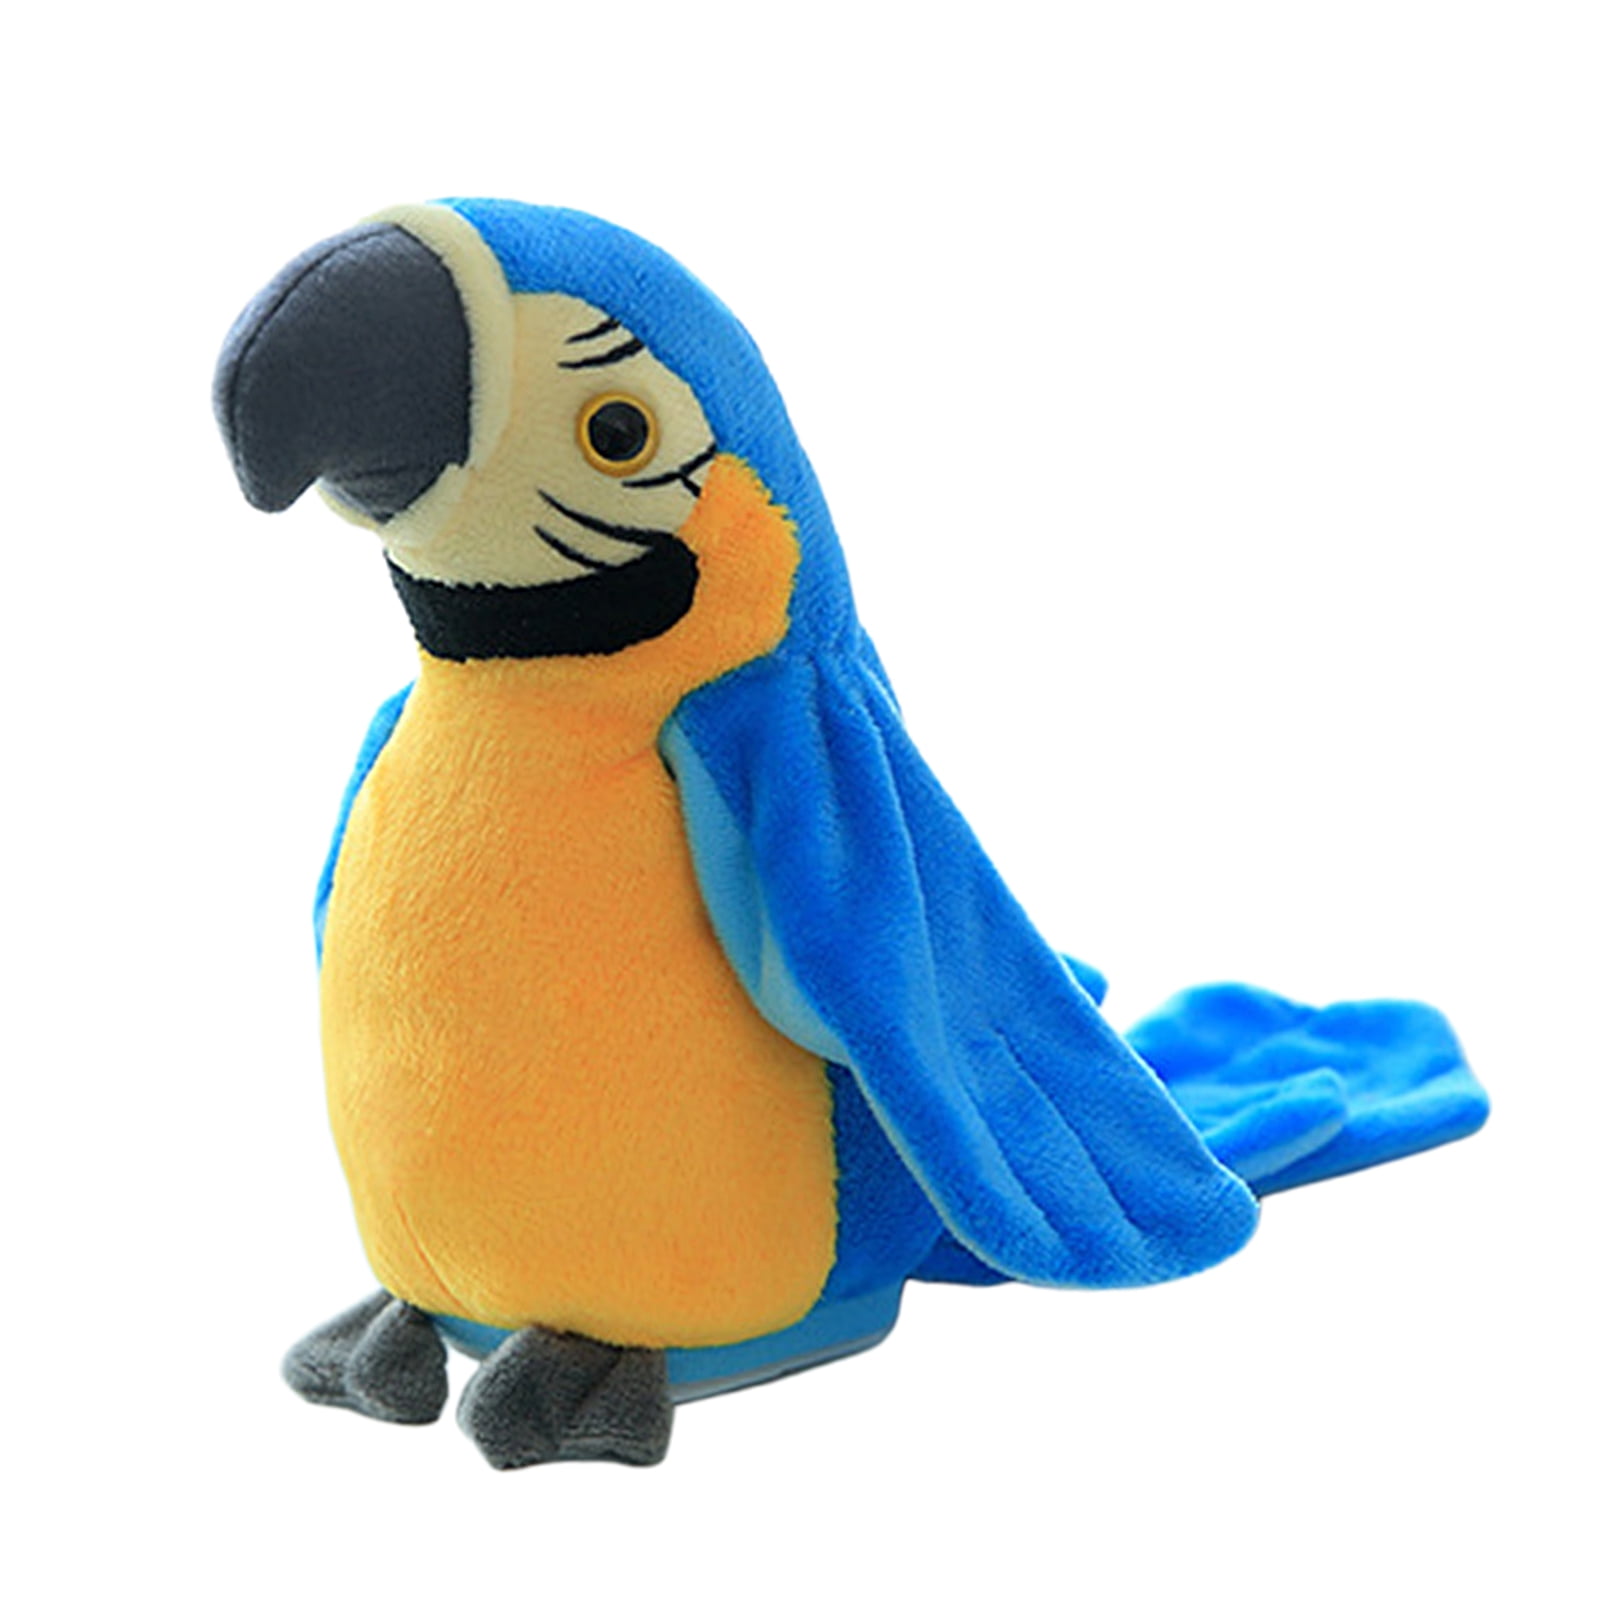 Repeating Parrot Bird Adult Kid Talking Battery Powered Toy Electronic Pet B 